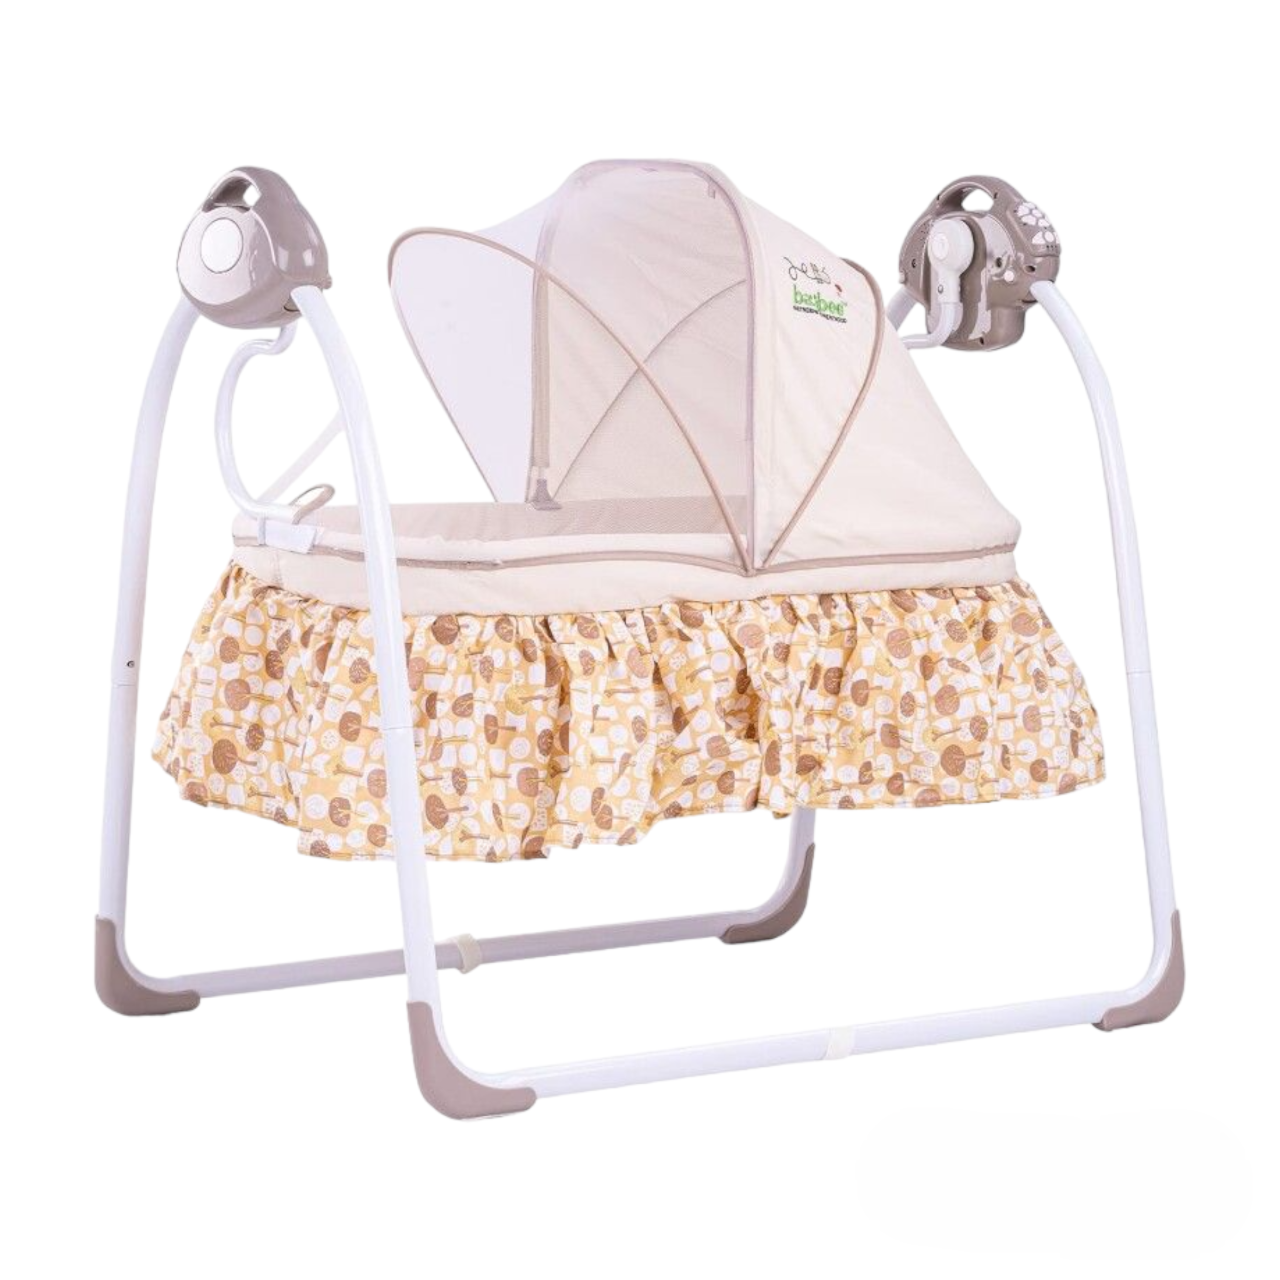 Baybee Electric Baby Swing Cradle With Mosquito Net And Music Sleeping Basket Bed For 0-12 Months (Brown)